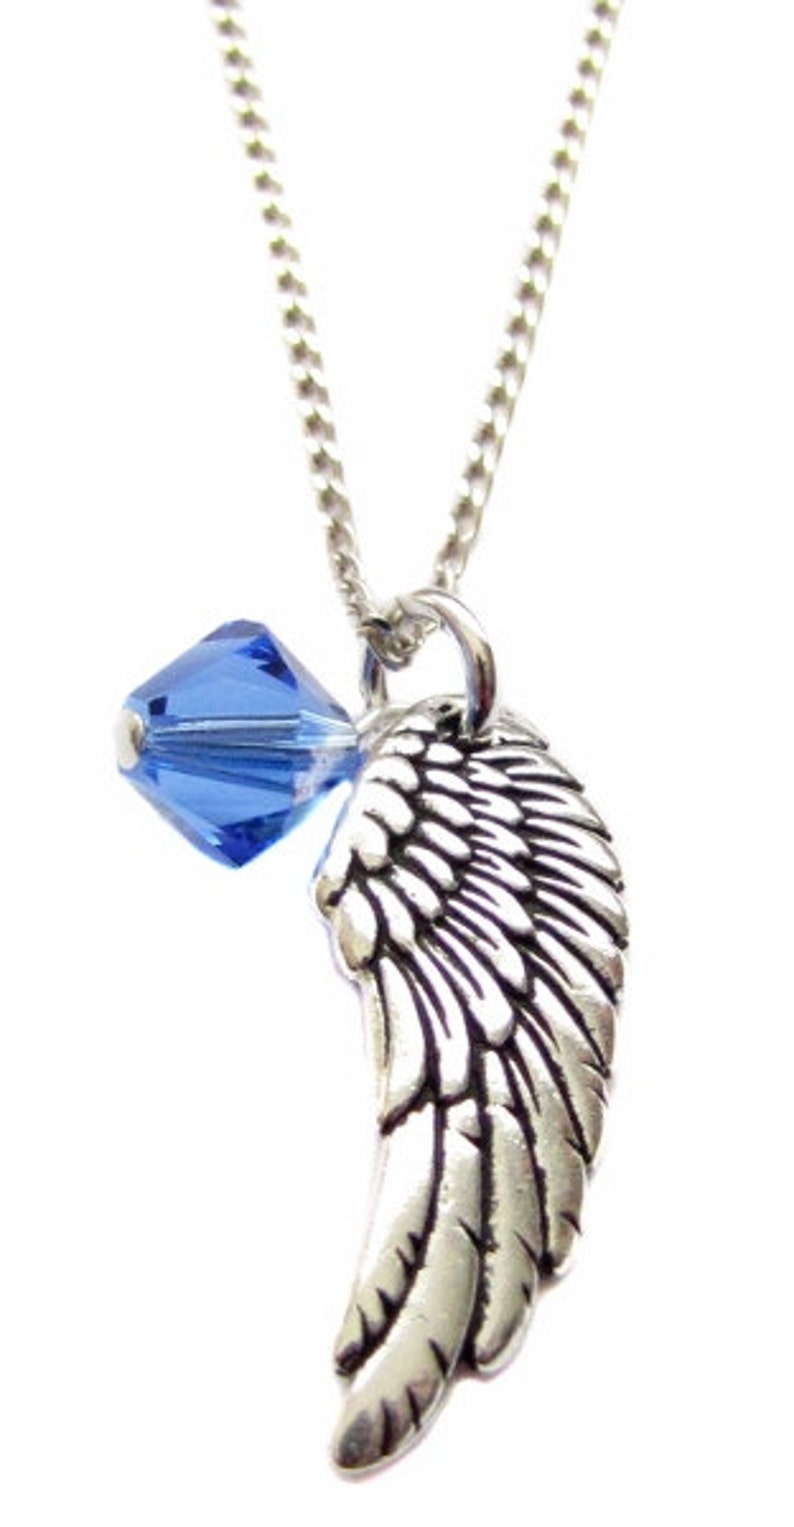 Archange Michael Pewter Angel Wing Charm Swarovski Crystal, Sterling Silver Collier 18, Angel Wing Prayer Jewelry Gift image 1